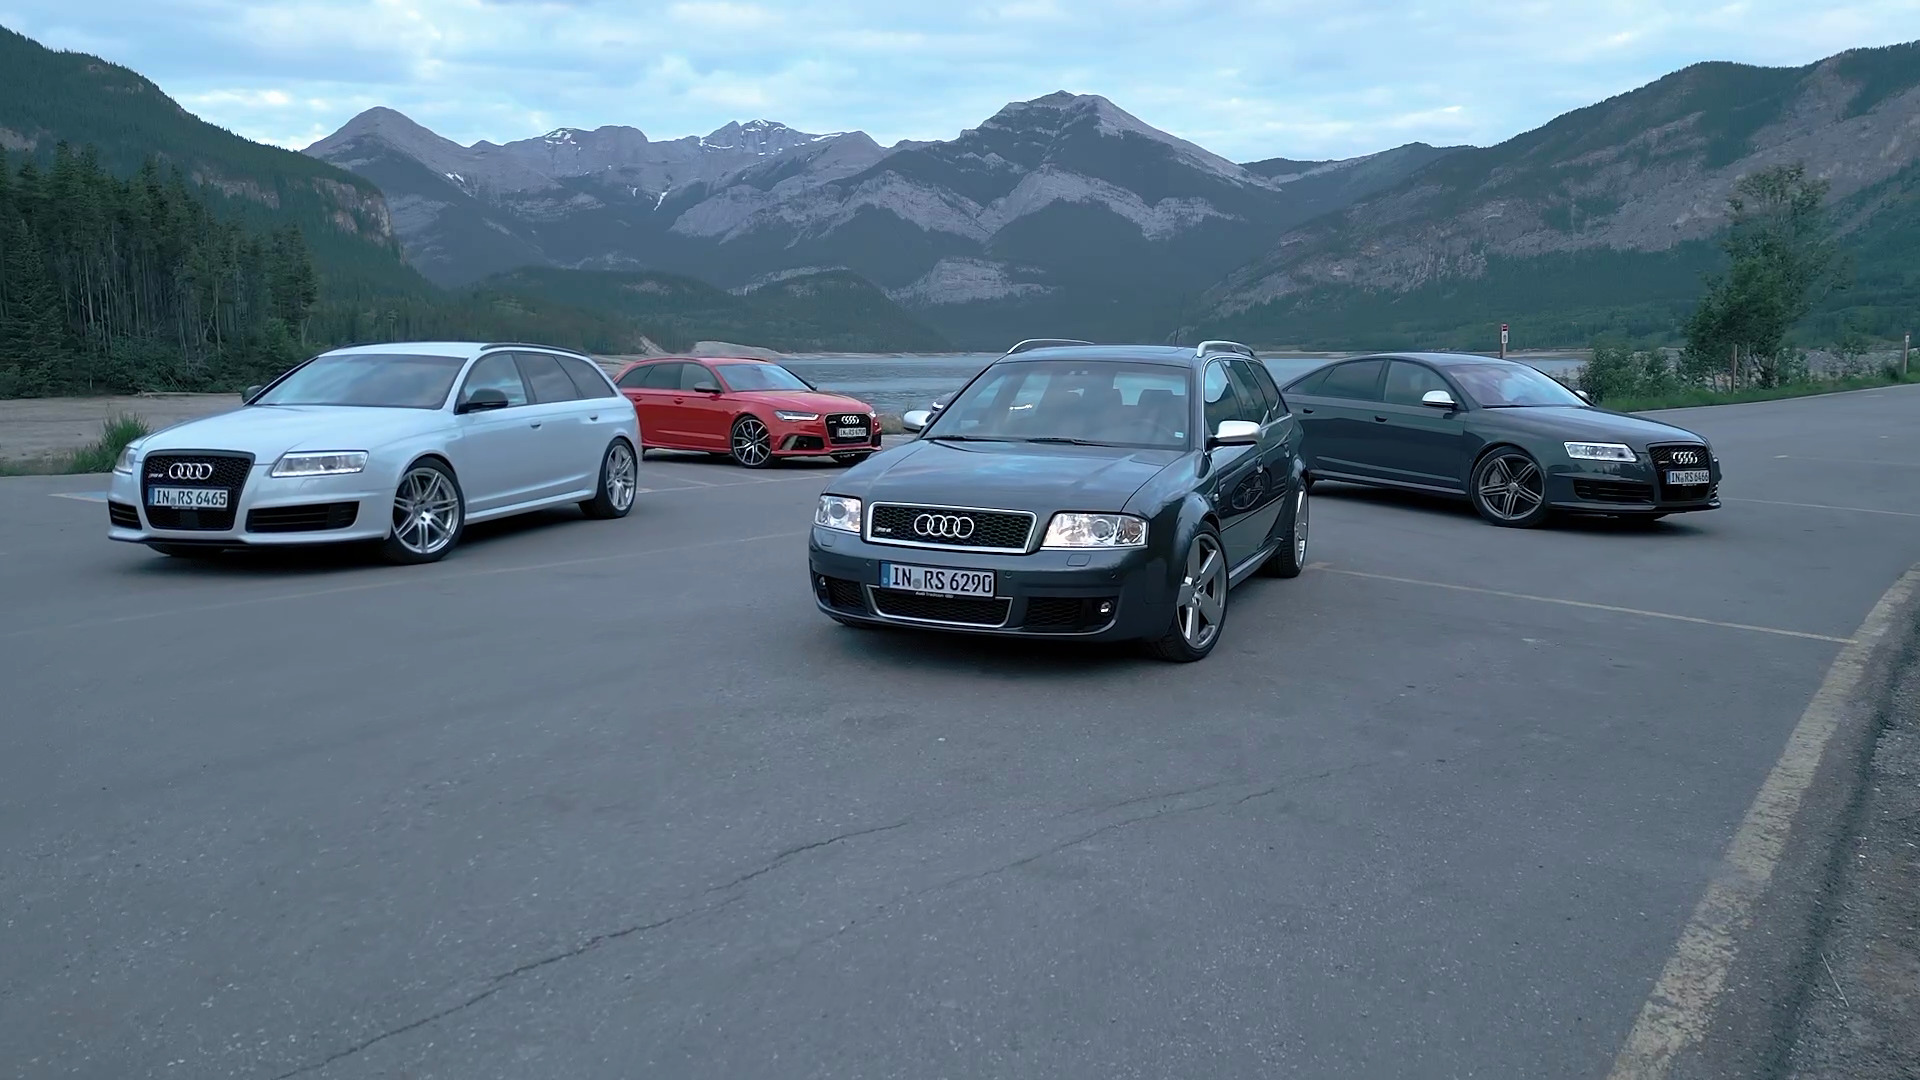 20 years, four generations – Audi RS 6: Superior performance with